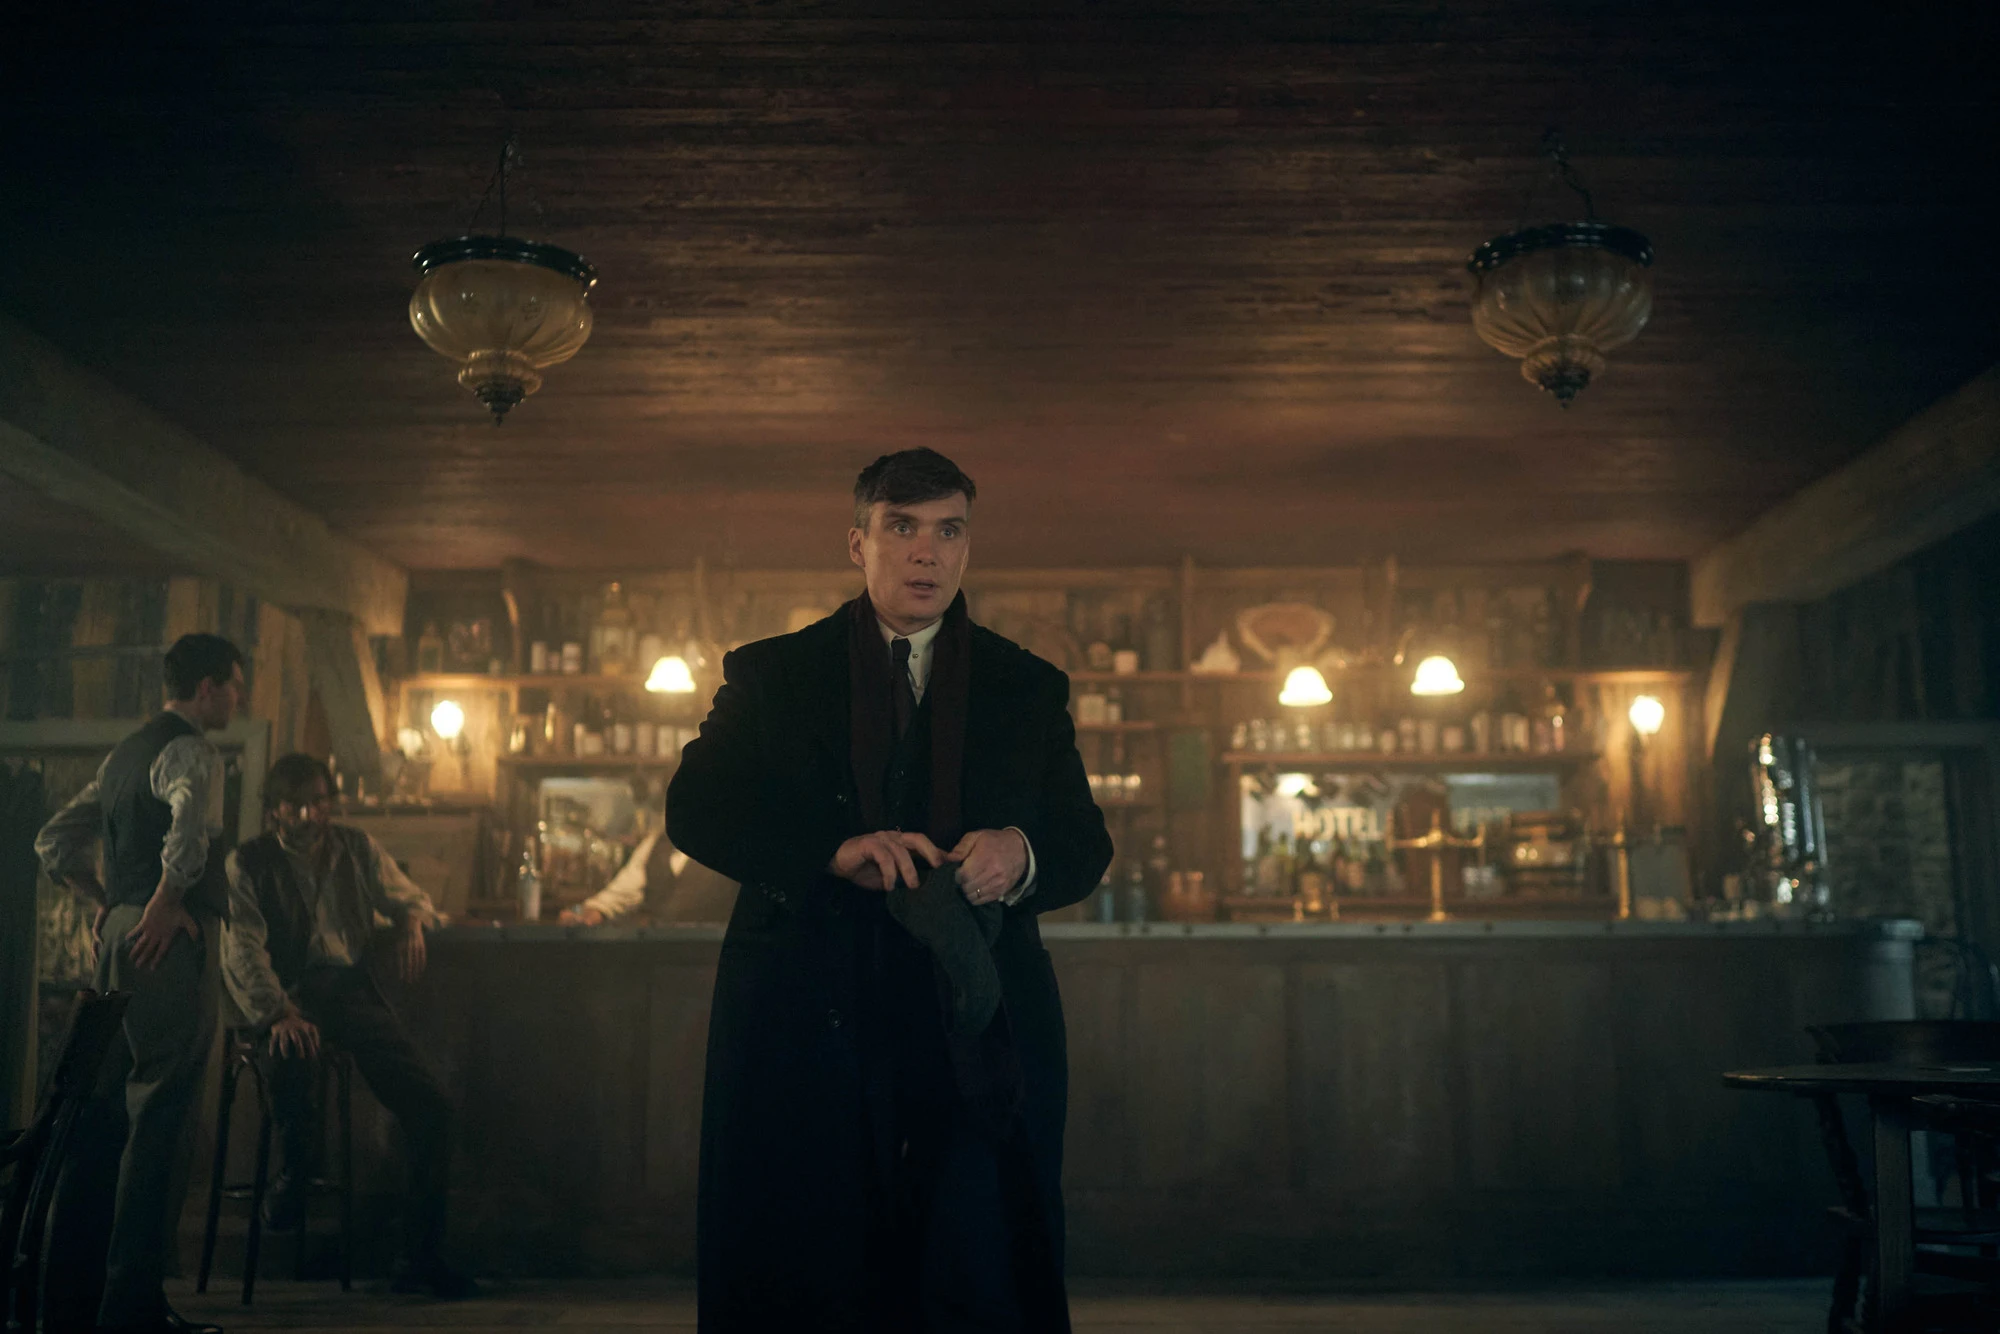 Most Important Real Life References in Peaky Blinders Season 6